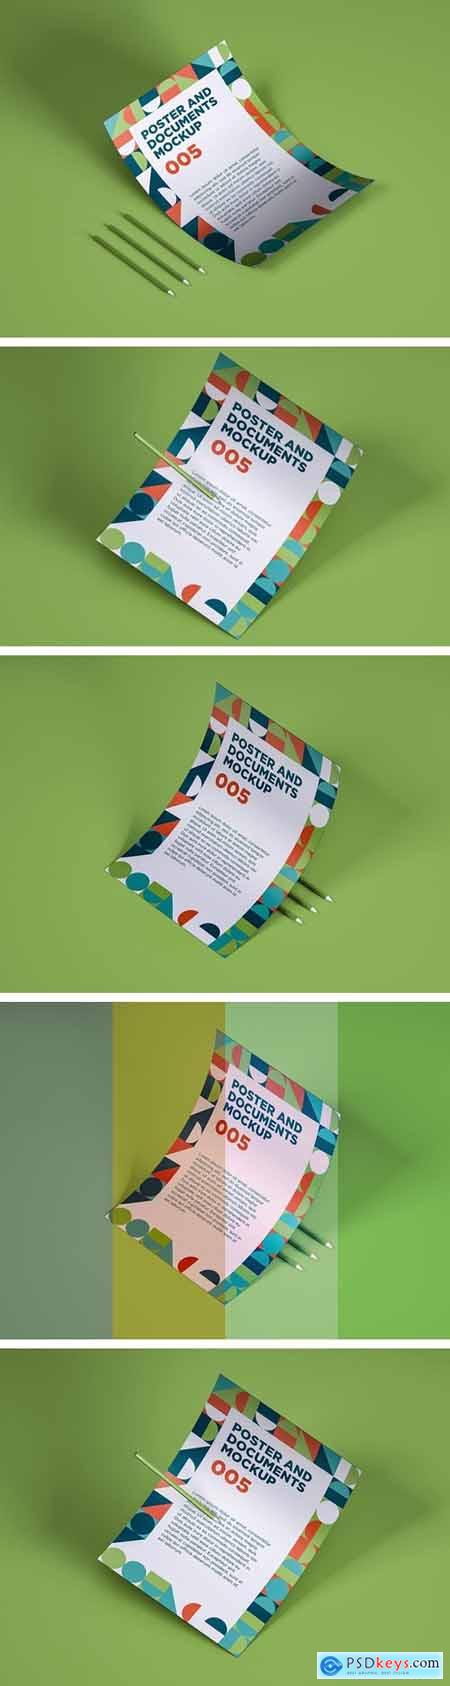 Poster And Documents Mockup 005